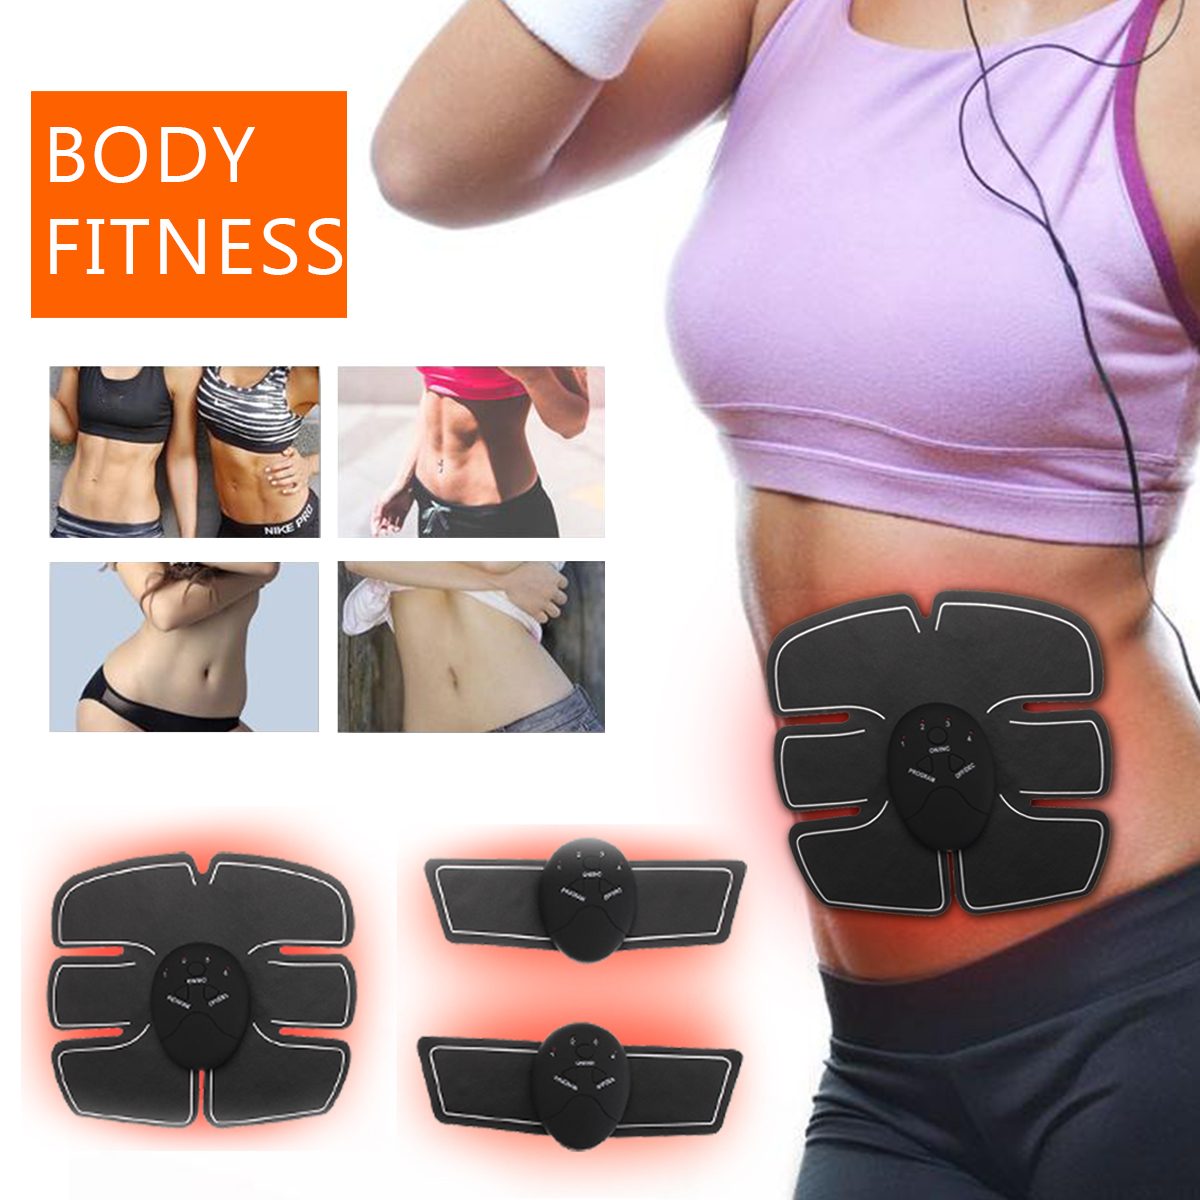 6-Modes-Smart-Abdominal-Muscle-Trainer-Abdomen-Arm-Shoulder-Strength-Fitness-Exercise-Tool-ABS-Stimu-1642922-1